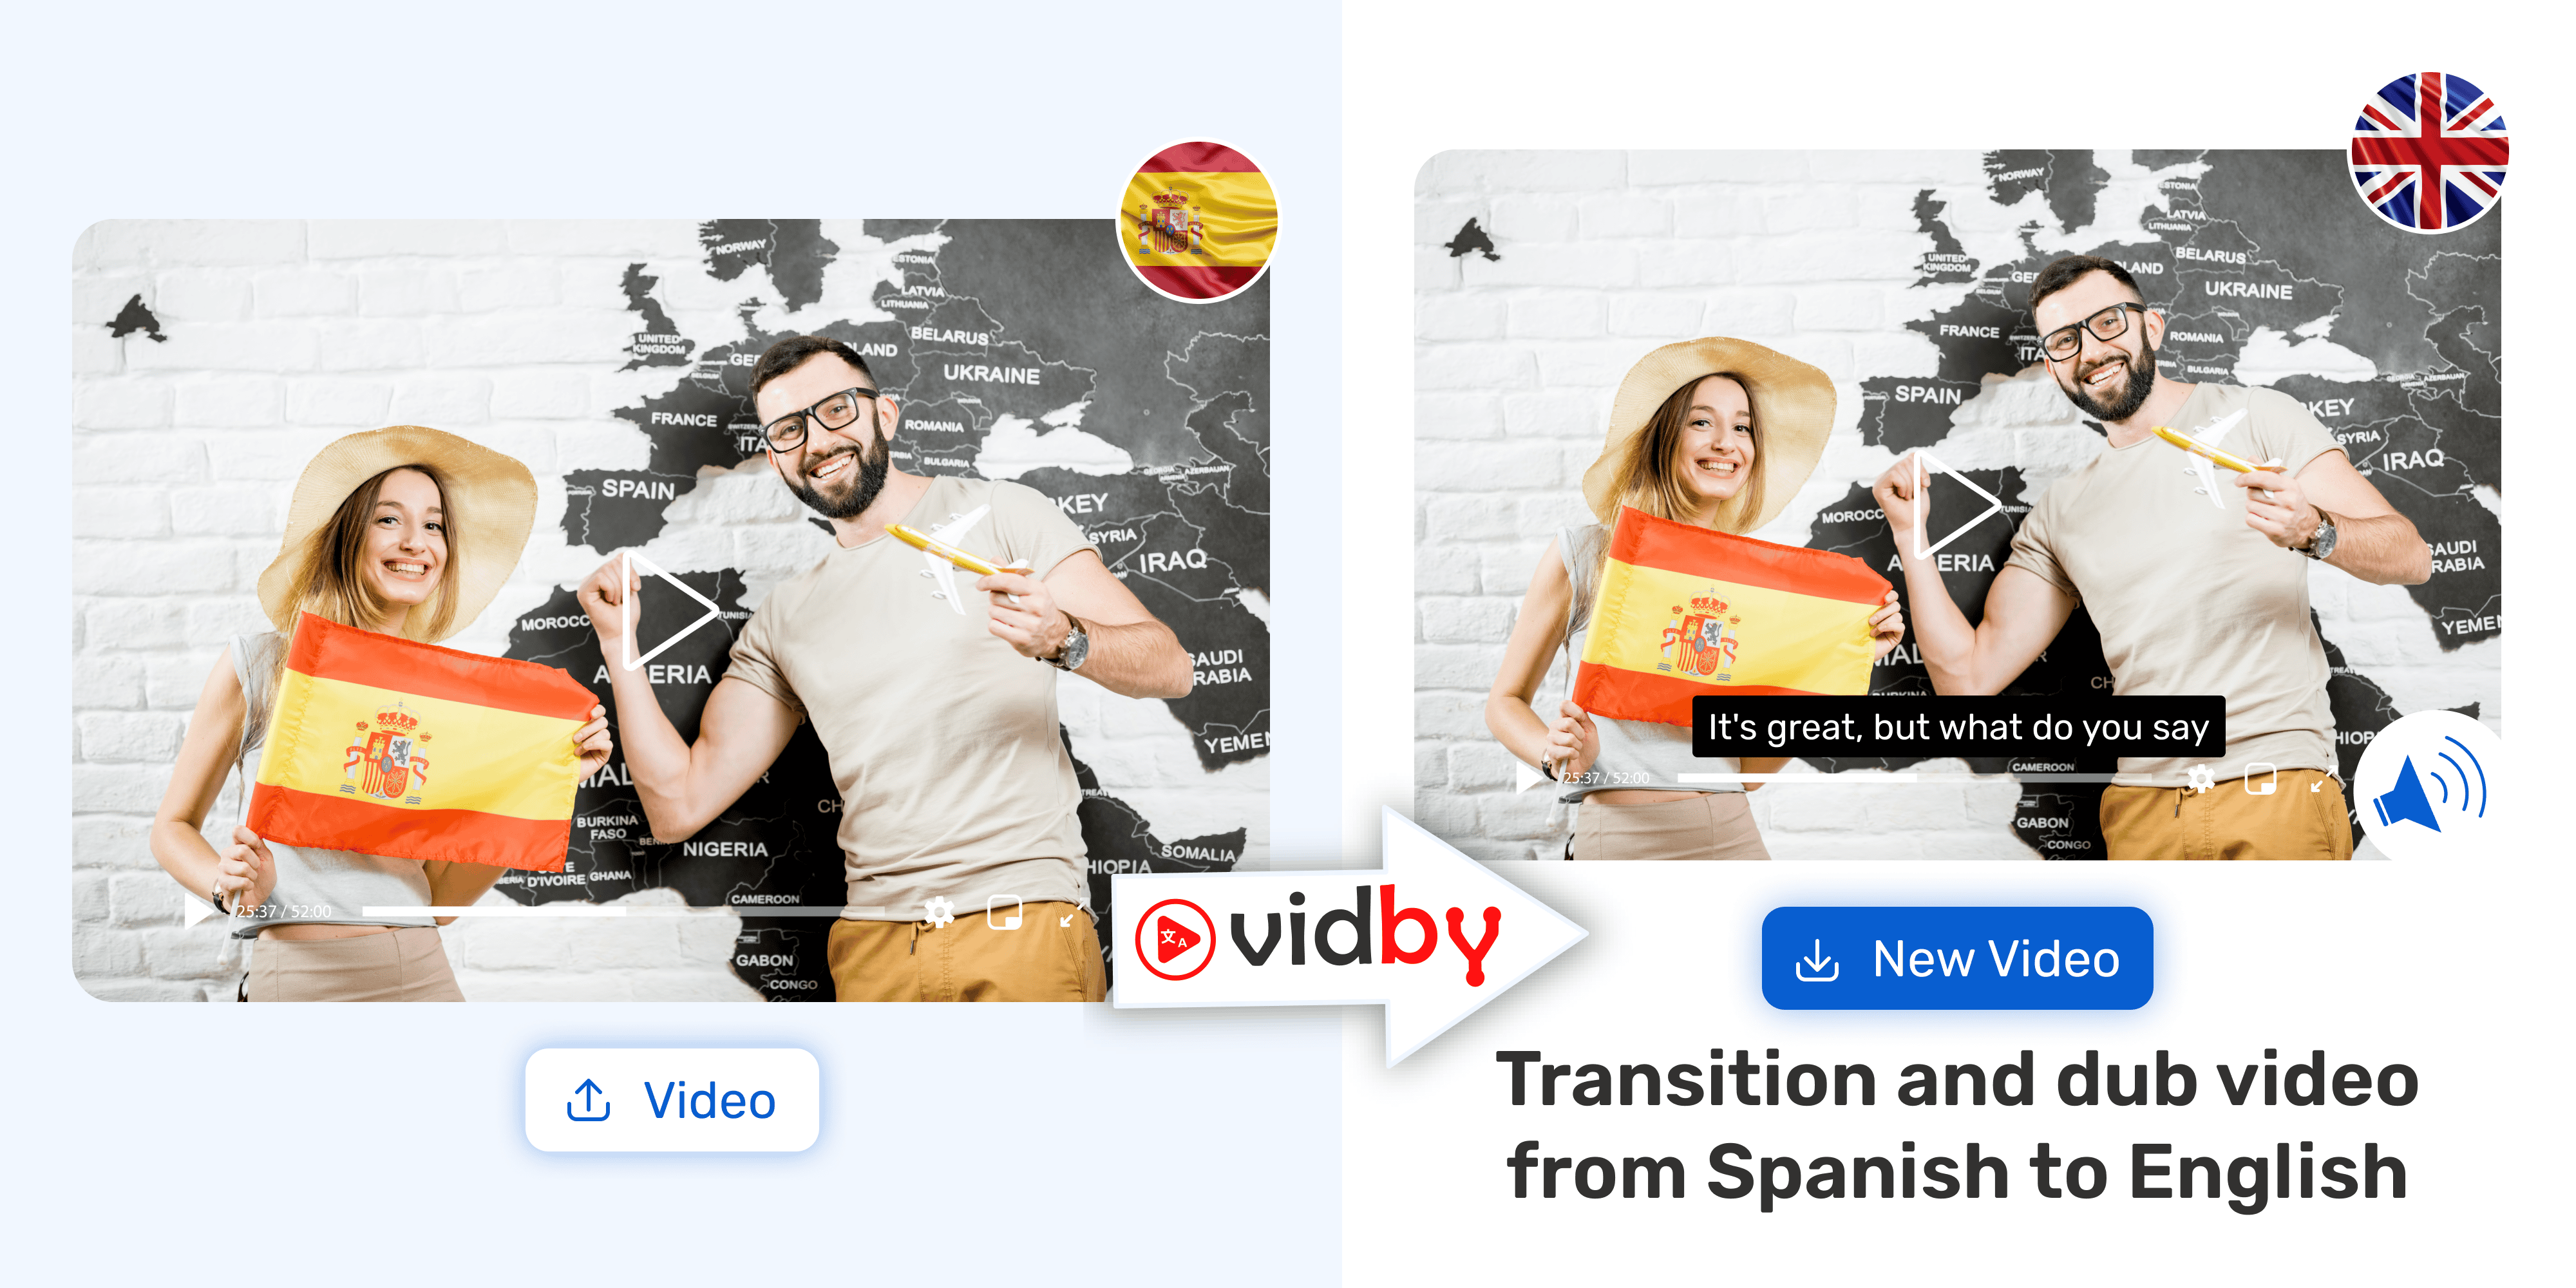 Translation of your video from Spanish into English in the Vidby service